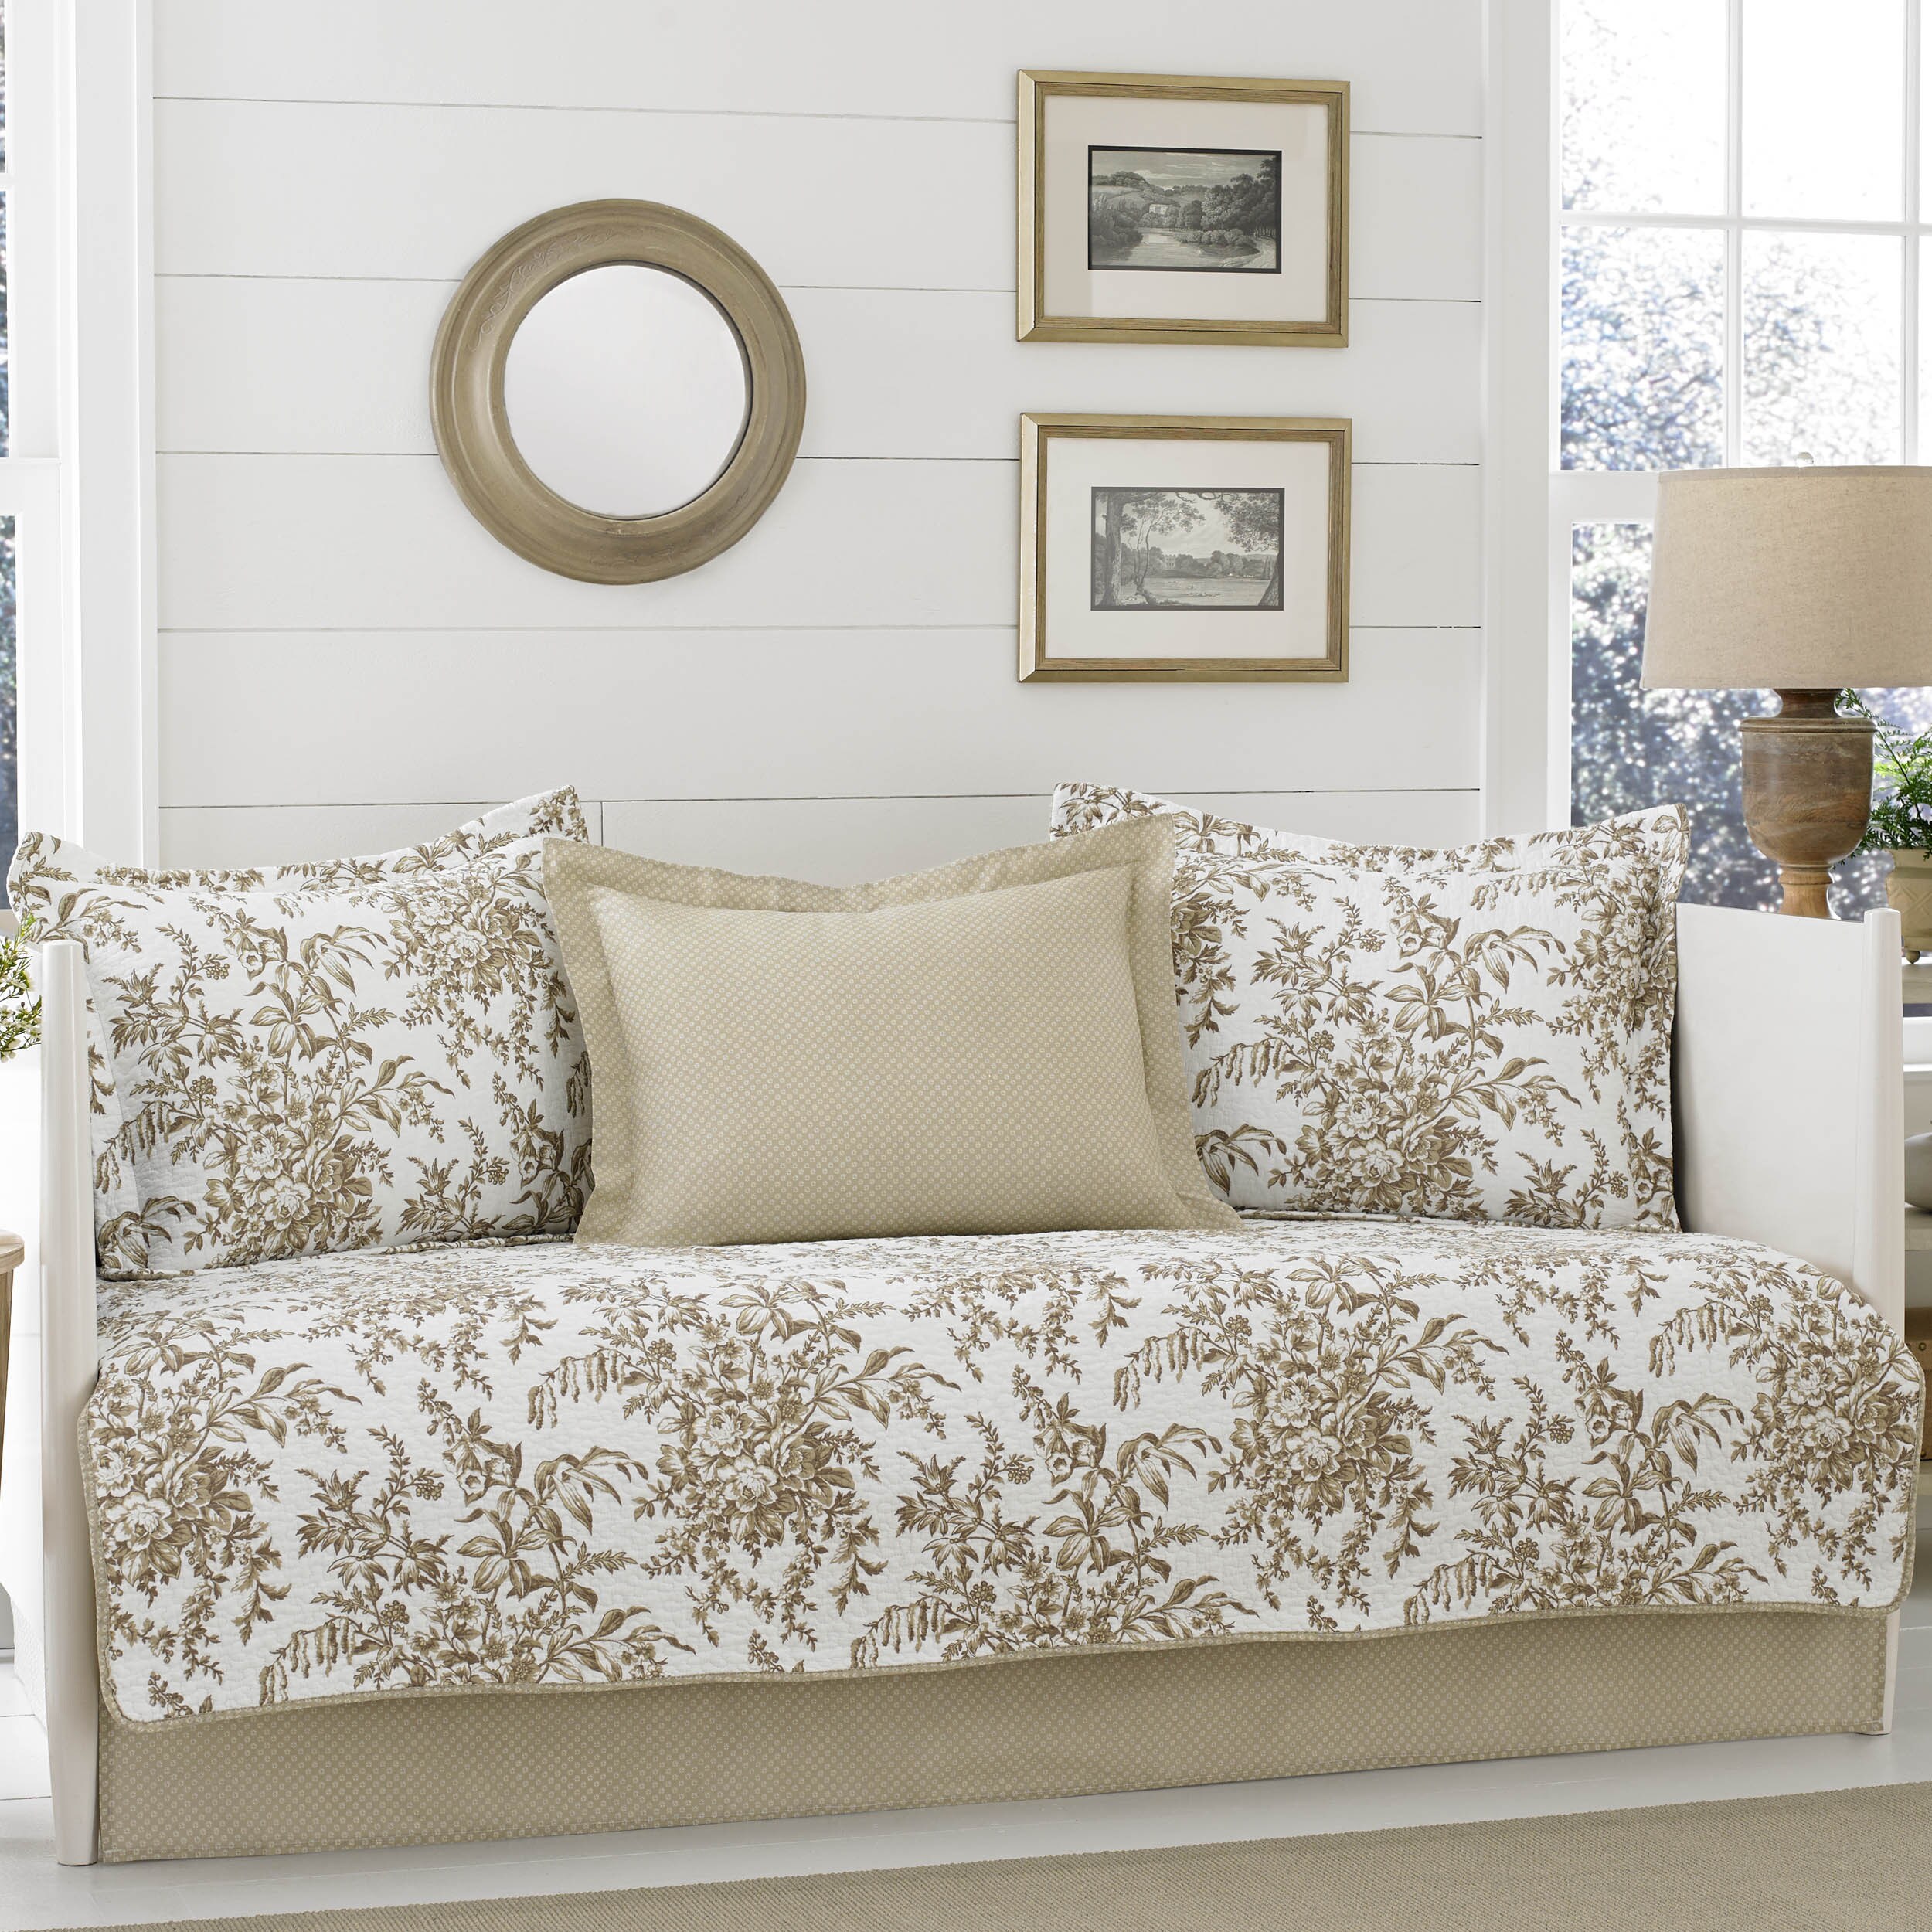 Shop Laura Ashley Bedford Mocha 5-piece Daybed Cover Set - Free ...